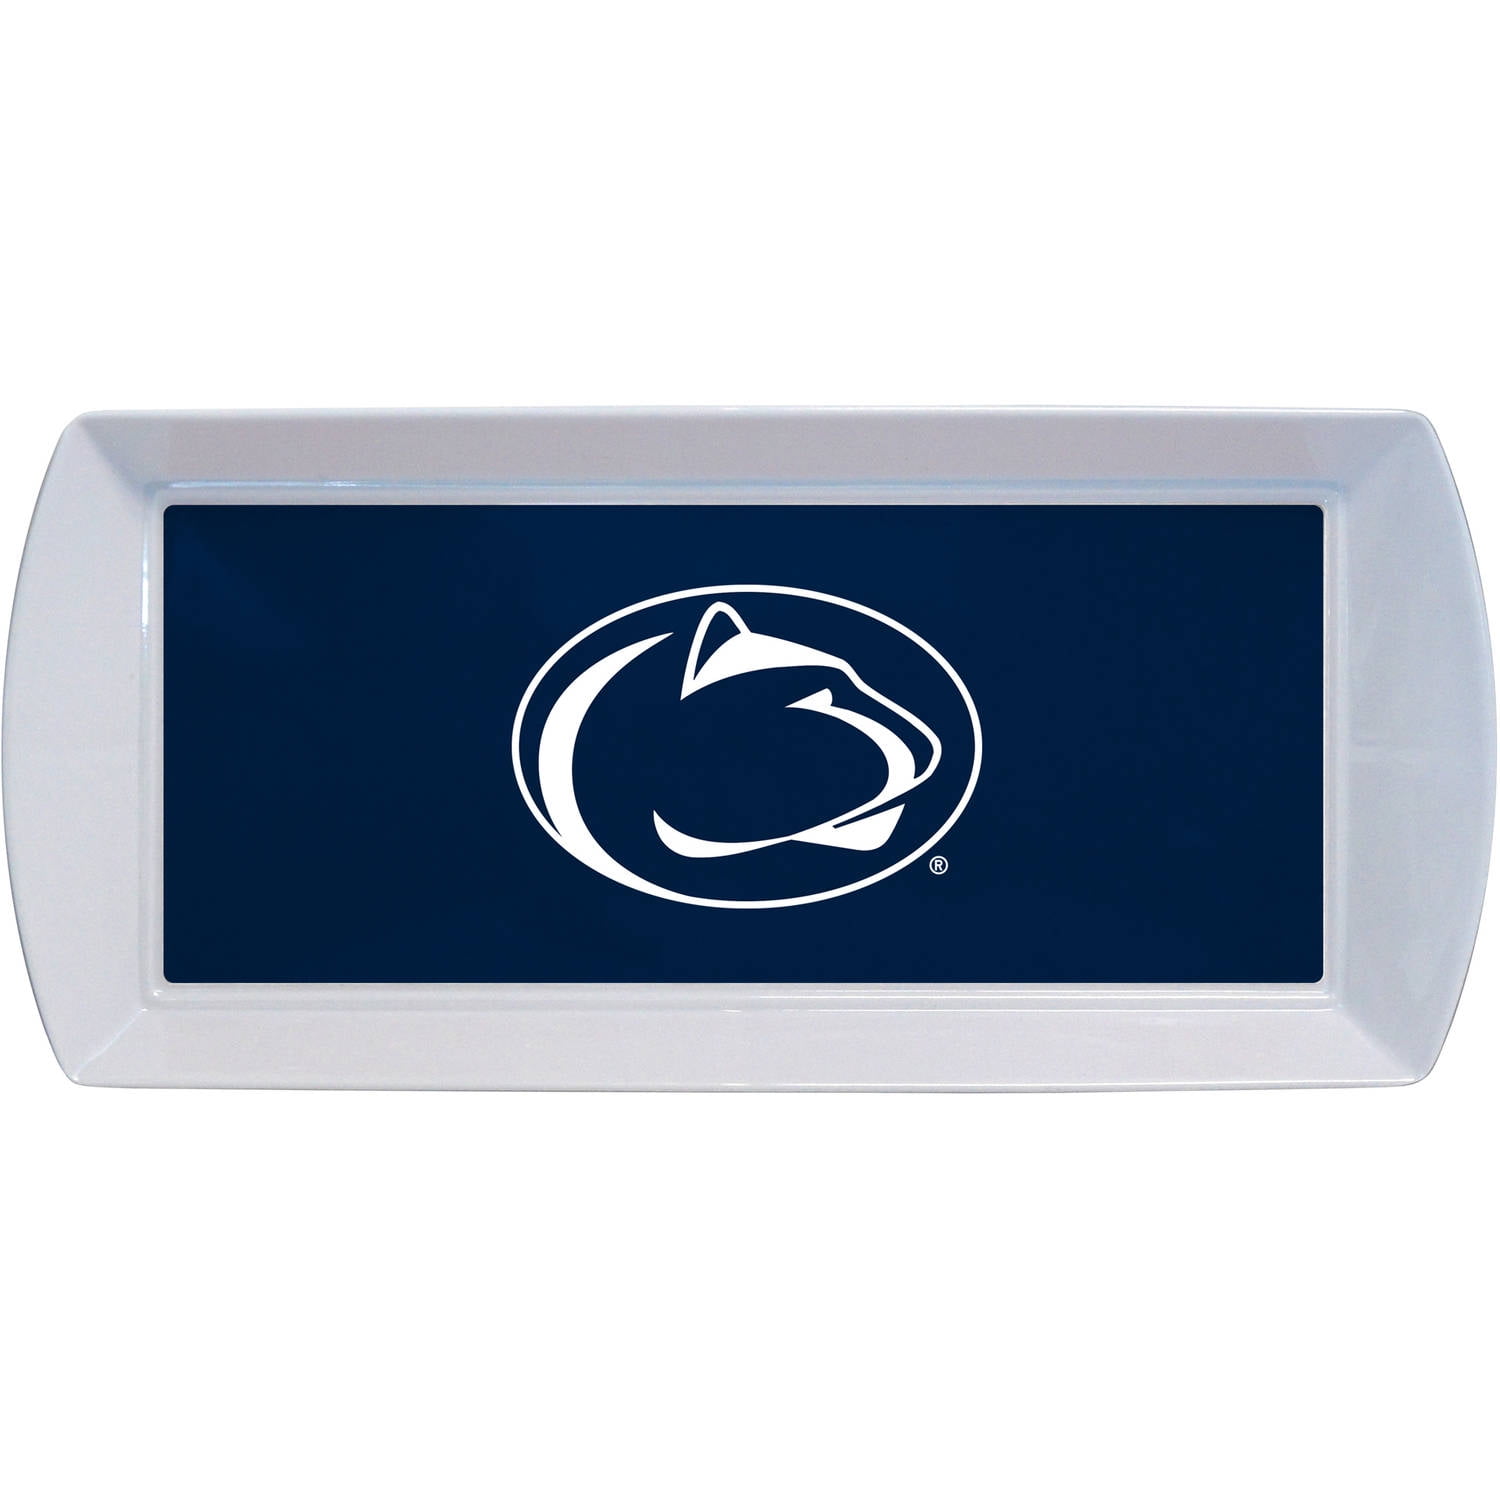 NCAA Penn State Nittany Lions Melamine Serving Tray 